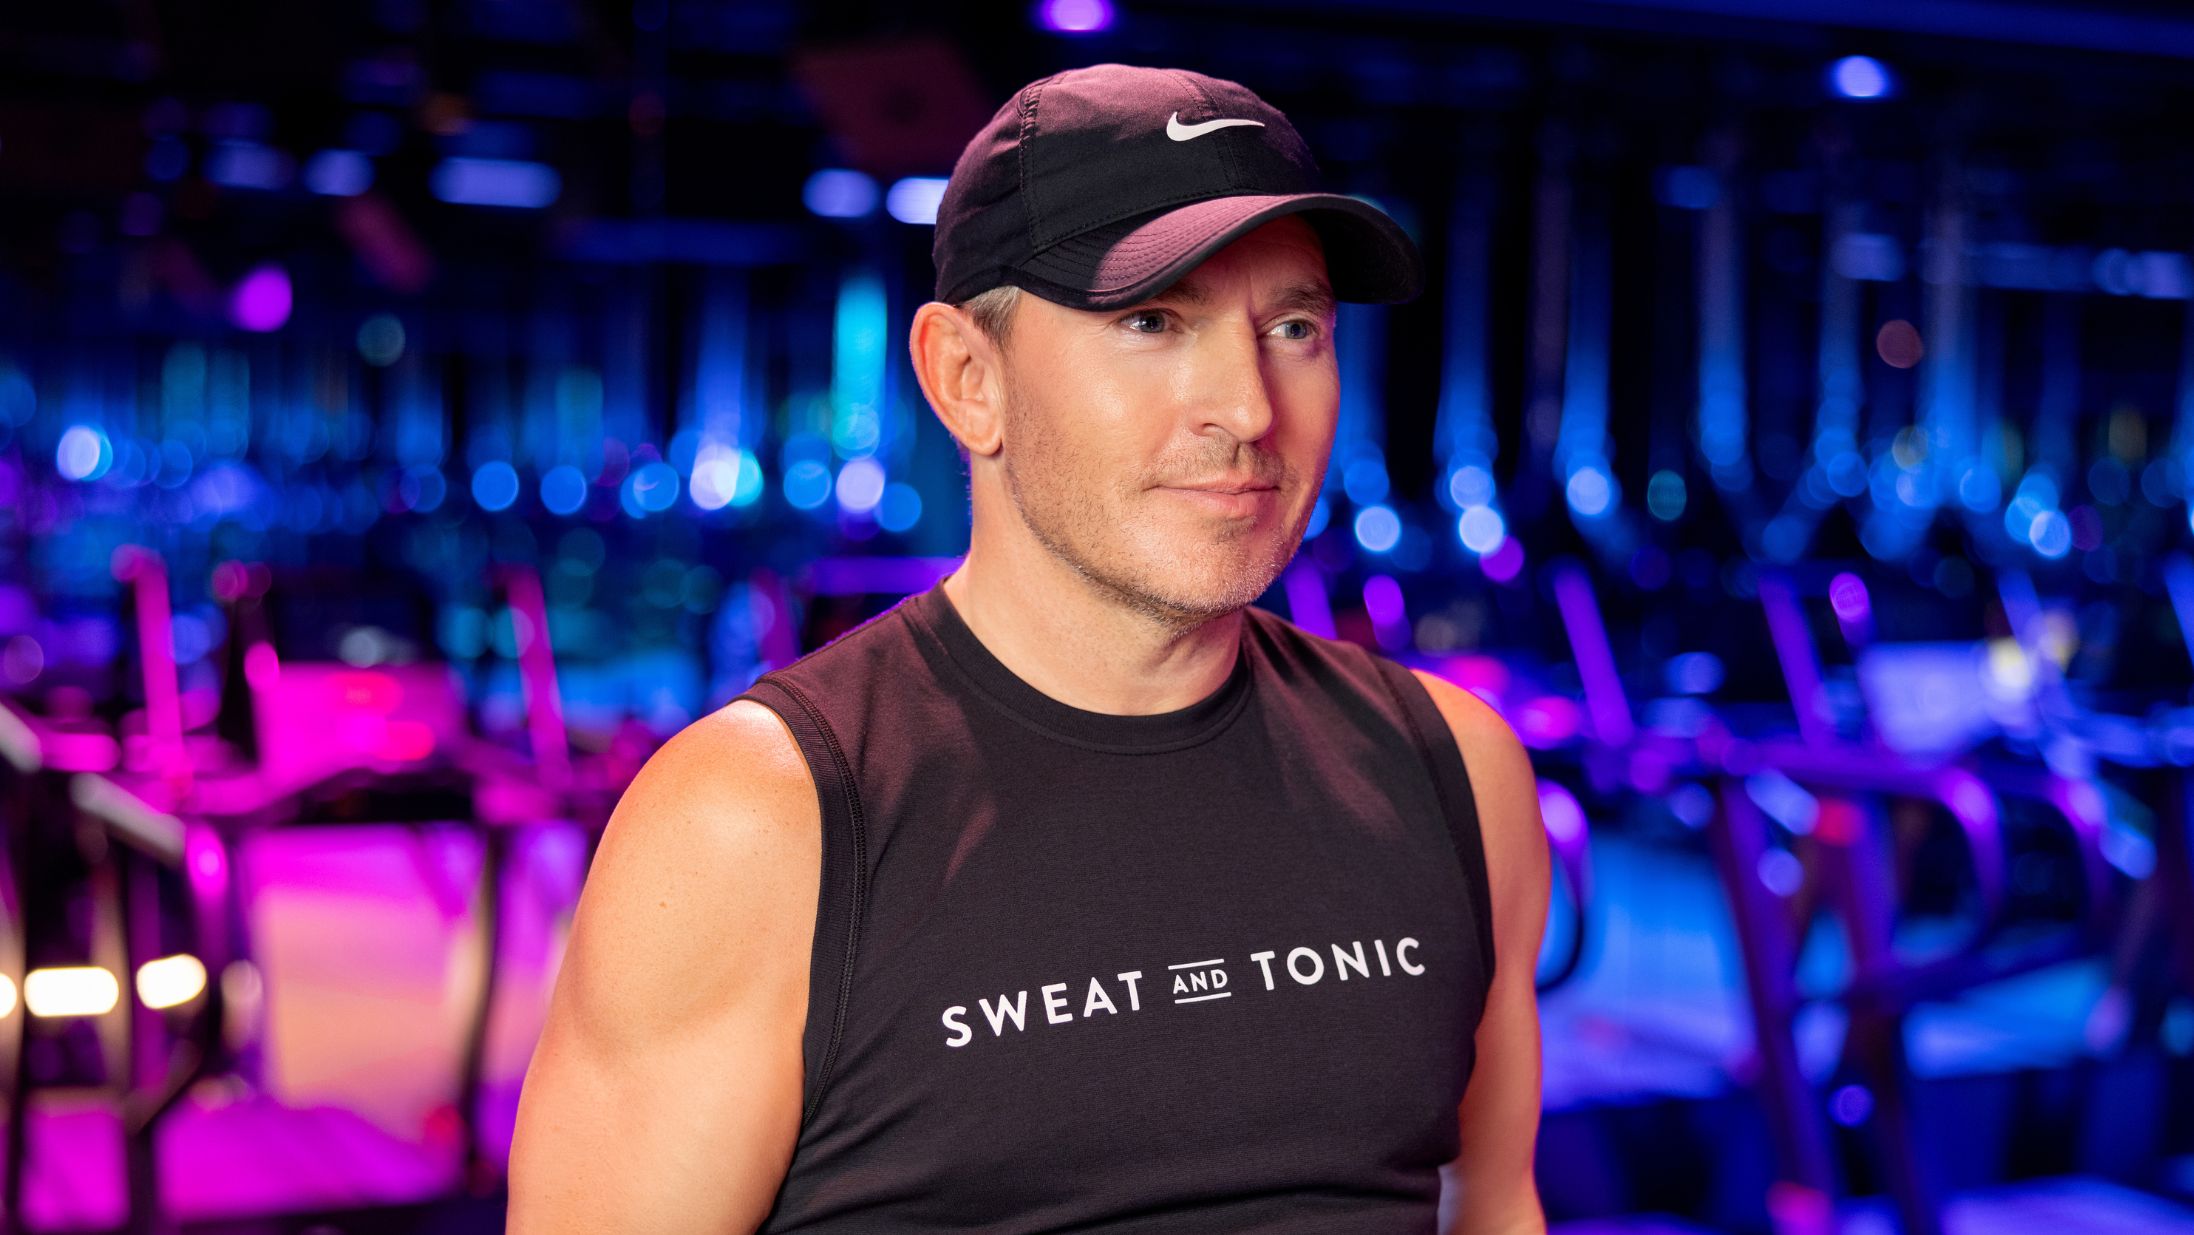 David Ingram wearing a sleeveless branded Sweat and Tonic shit and baseball hat in a gym.